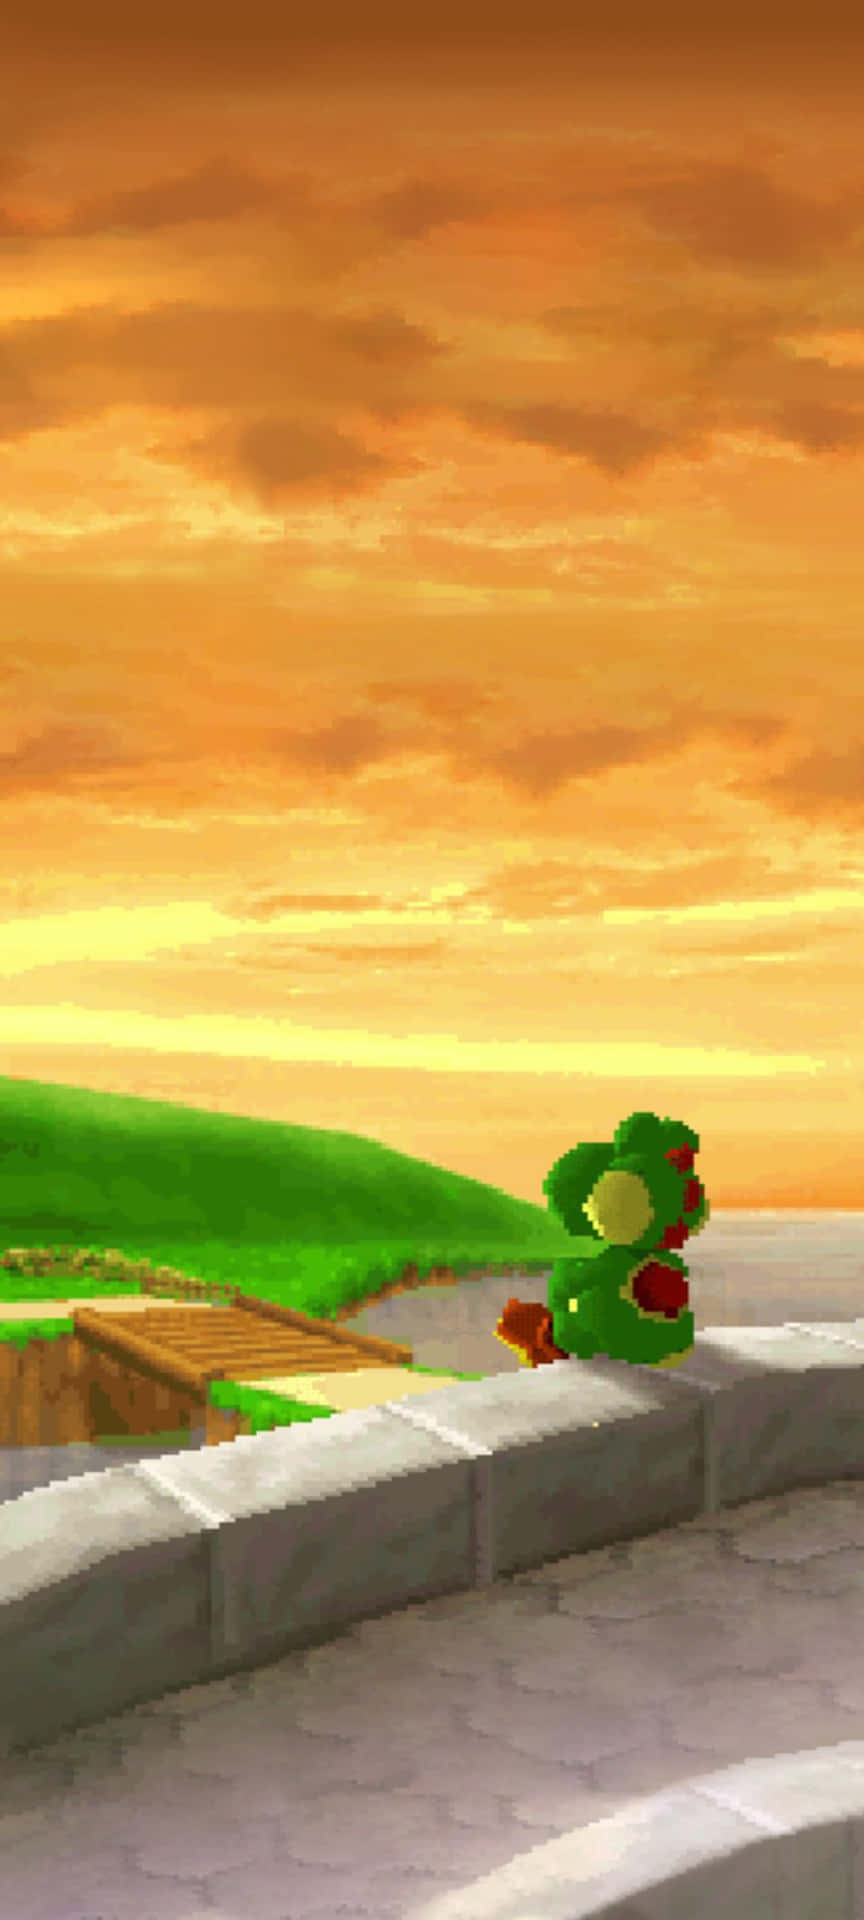 Join Yoshi In This Colorful Adventure!